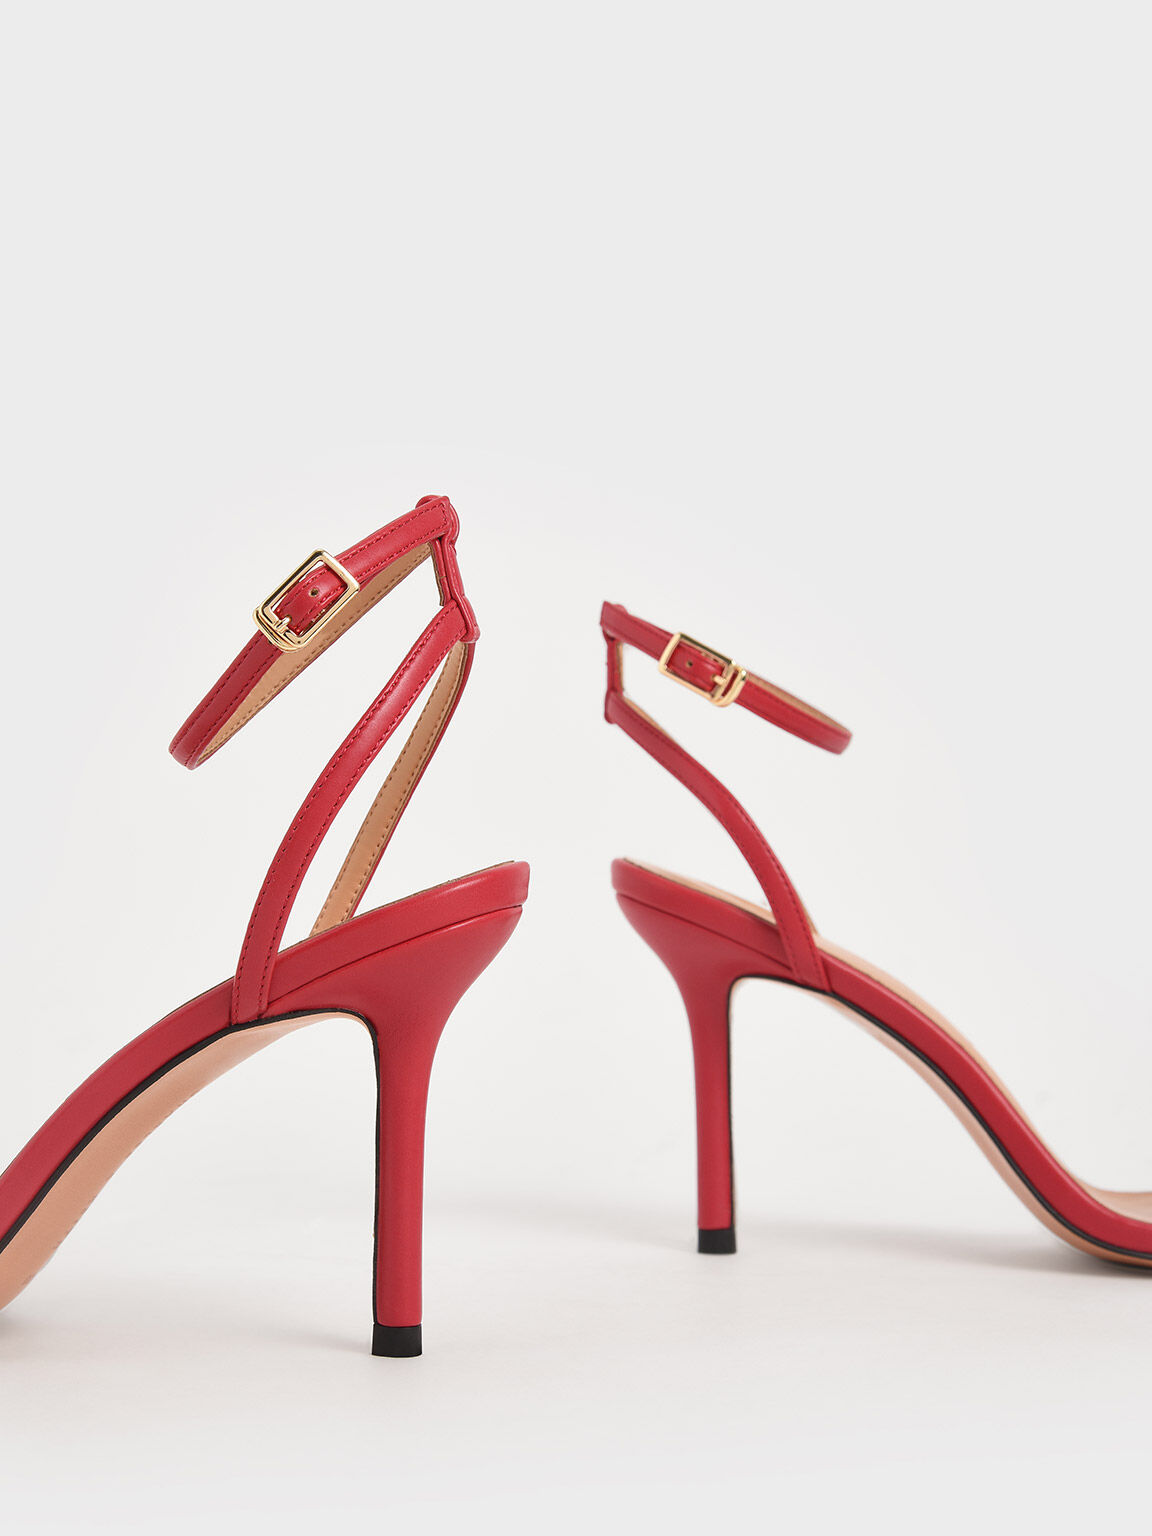 Bow Ankle Strap Sandals, Red, hi-res